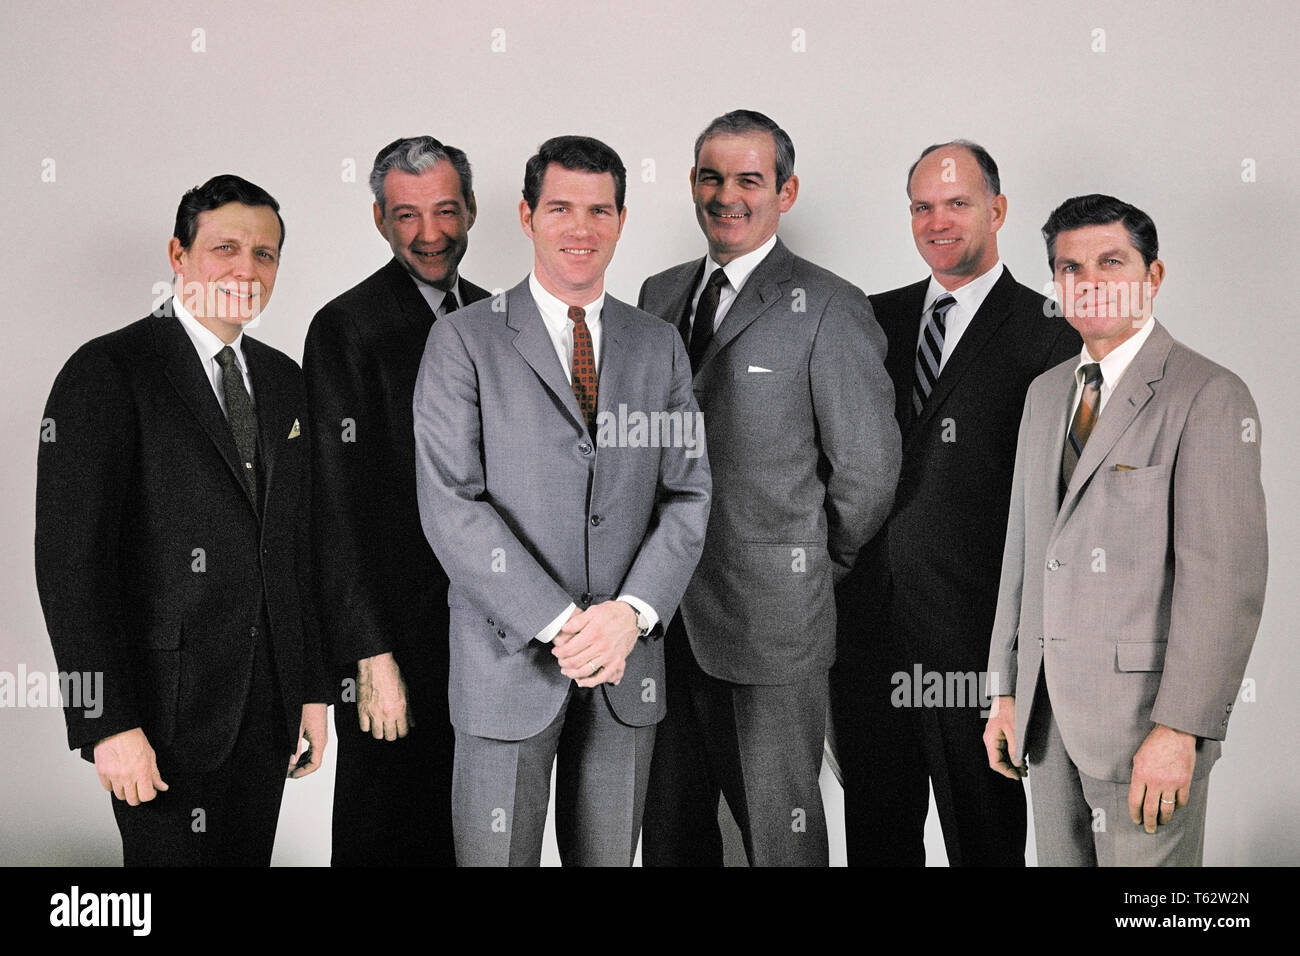 1960s SIX BUSINESSMEN EXECUTIVE GROUP ALL CAUCASIAN WEARING SUITS STANDING IN LINE SMILING LOOKING AT CAMERA  - kc3873 HAR001 HARS SATISFACTION STUDIO SHOT HEALTHINESS 6 MANAGER COPY SPACE FRIENDSHIP HALF-LENGTH PERSONS MALES SIX CORPORATE CONFIDENCE EXECUTIVES EXPRESSIONS MIDDLE-AGED MIDDLE-AGED MAN EYE CONTACT SUCCESS SUIT AND TIE SELLING HAPPINESS CHEERFUL STRENGTH STYLES POWERFUL PRIDE AUTHORITY OCCUPATIONS SMILES BOARD OF DIRECTORS BOSSES CONNECTION JOYFUL STYLISH VARIOUS FASHIONS MANAGERS MID-ADULT MID-ADULT MAN SALESMEN TOGETHERNESS CAUCASIAN ETHNICITY HAR001 OLD FASHIONED Stock Photo